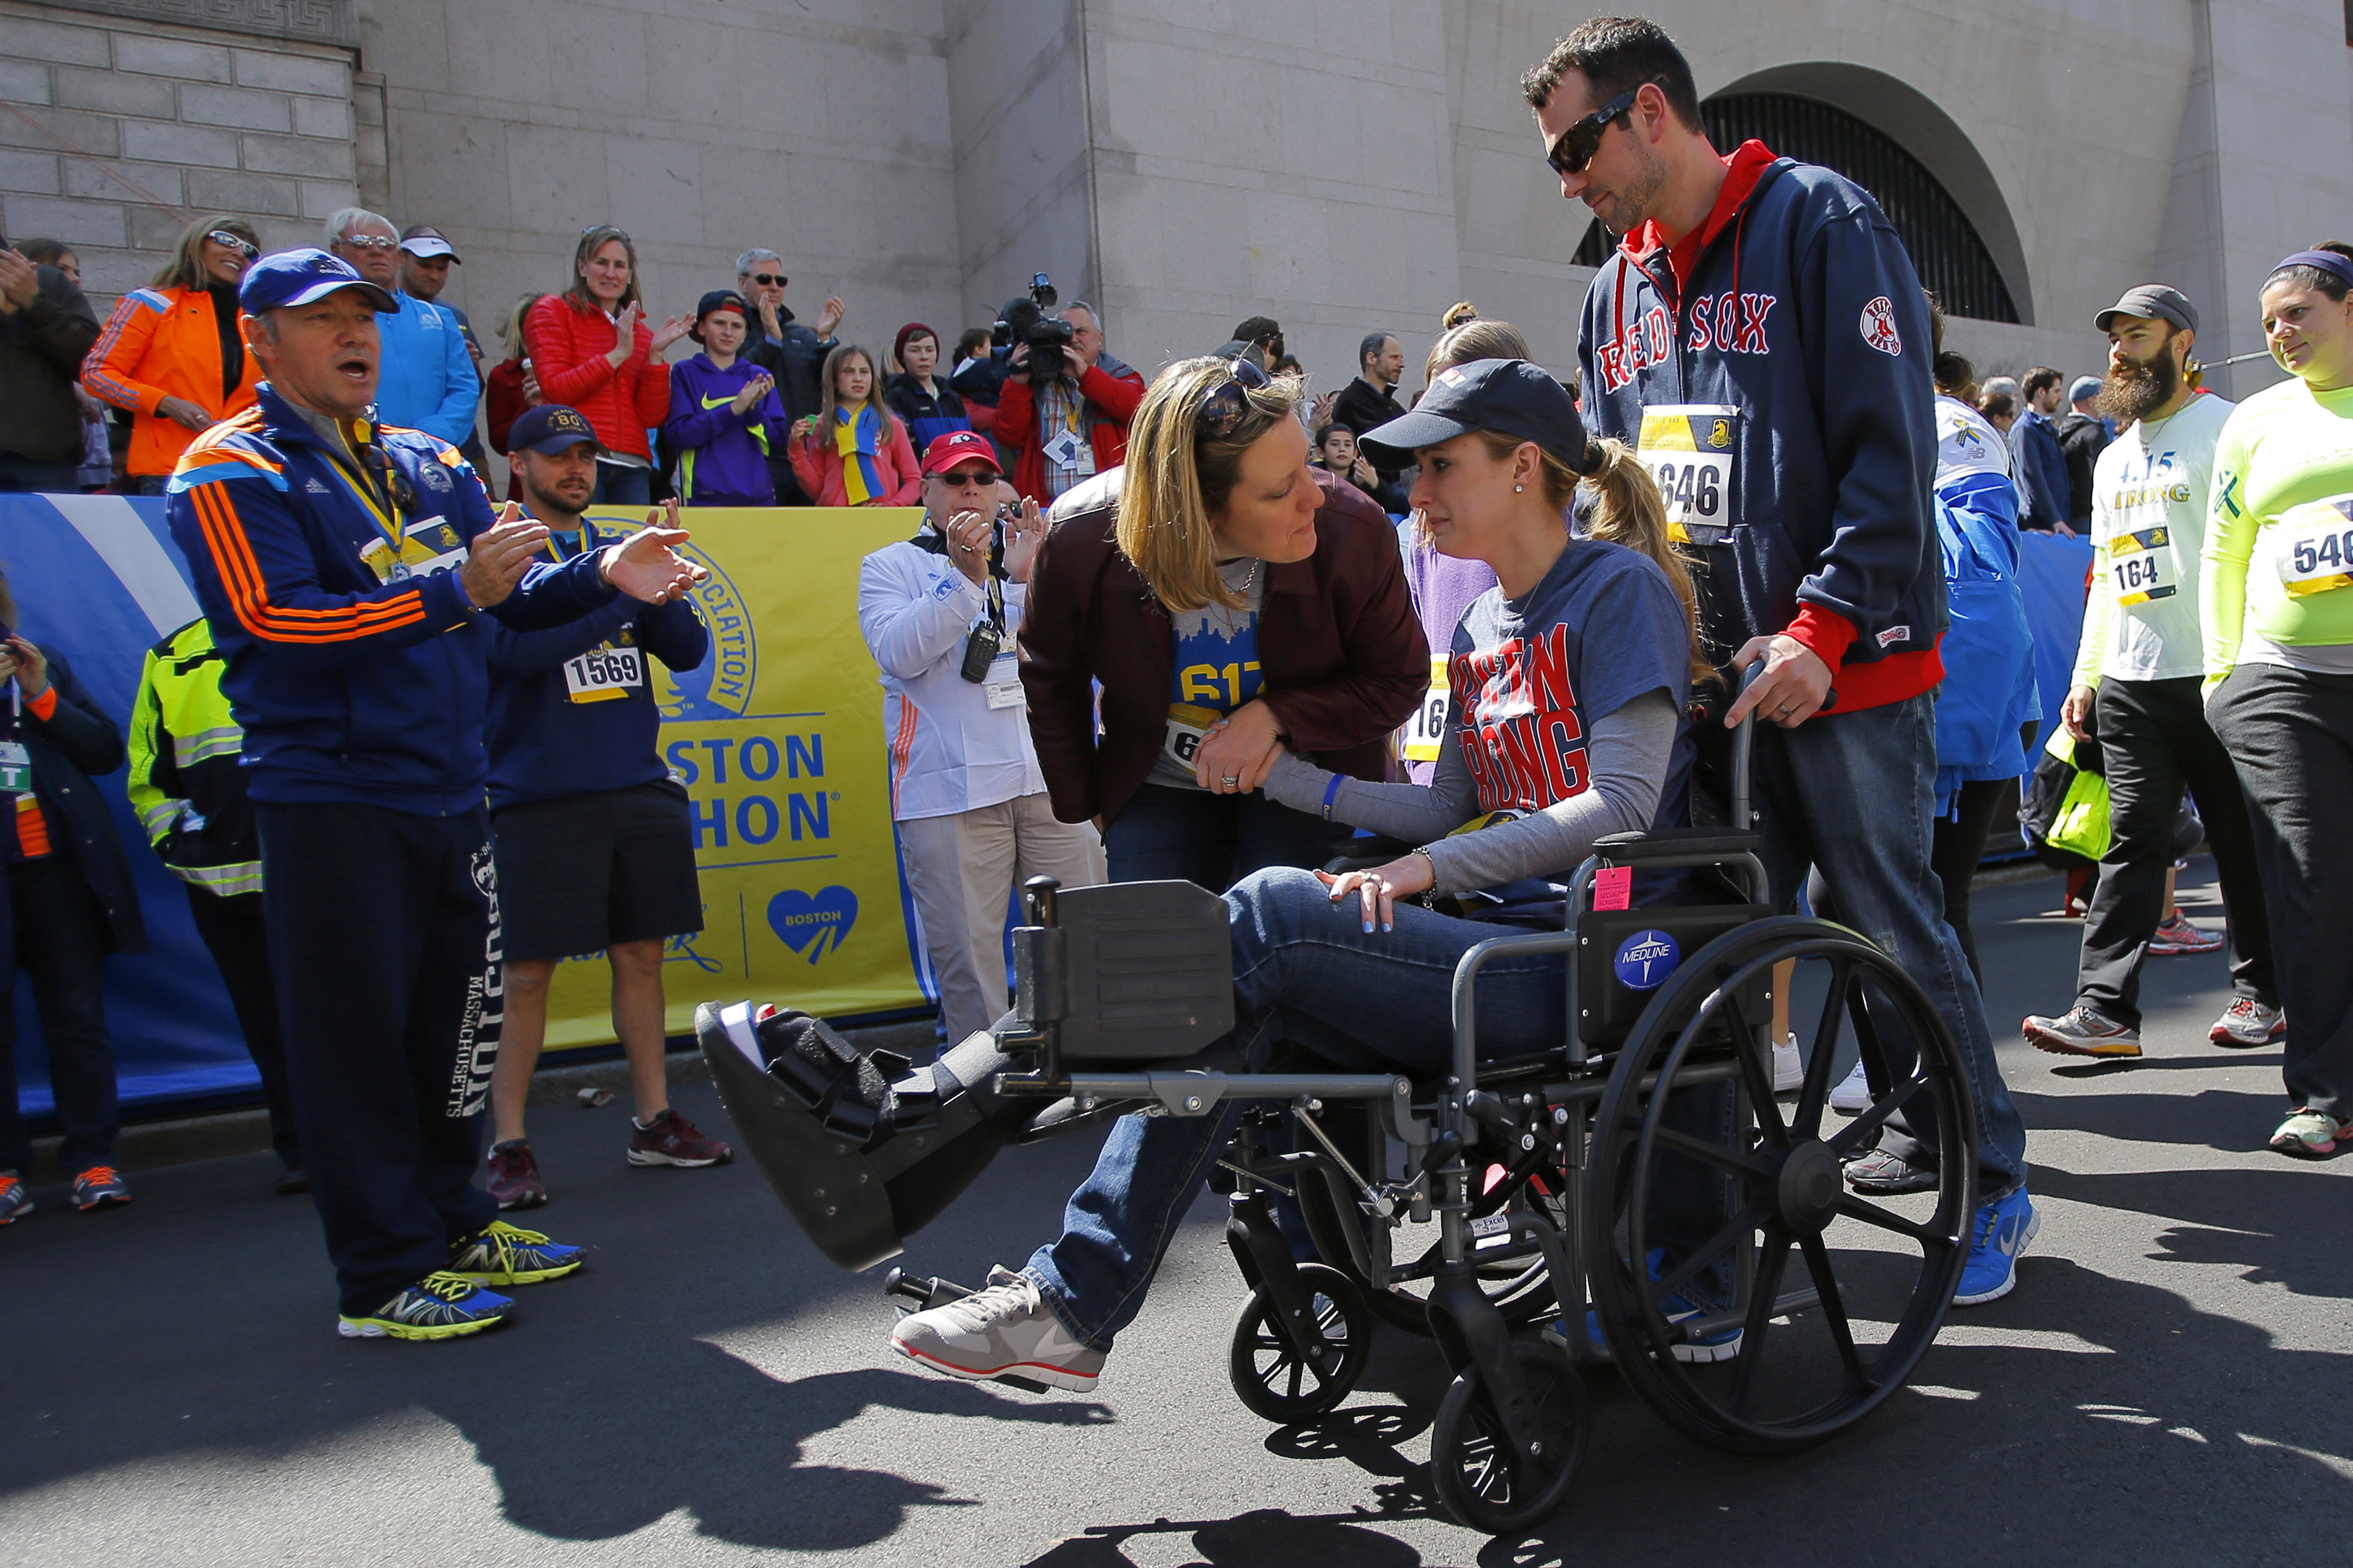 Actor Kevin Spacey (L) cheers on as 2013 Boston Marathon bombing survivor Rebekah Gregory DiMartino (2nd R) crosses the marathon finish line during a Tribute Run for survivors and first responders in Boston on April 19, 2014.